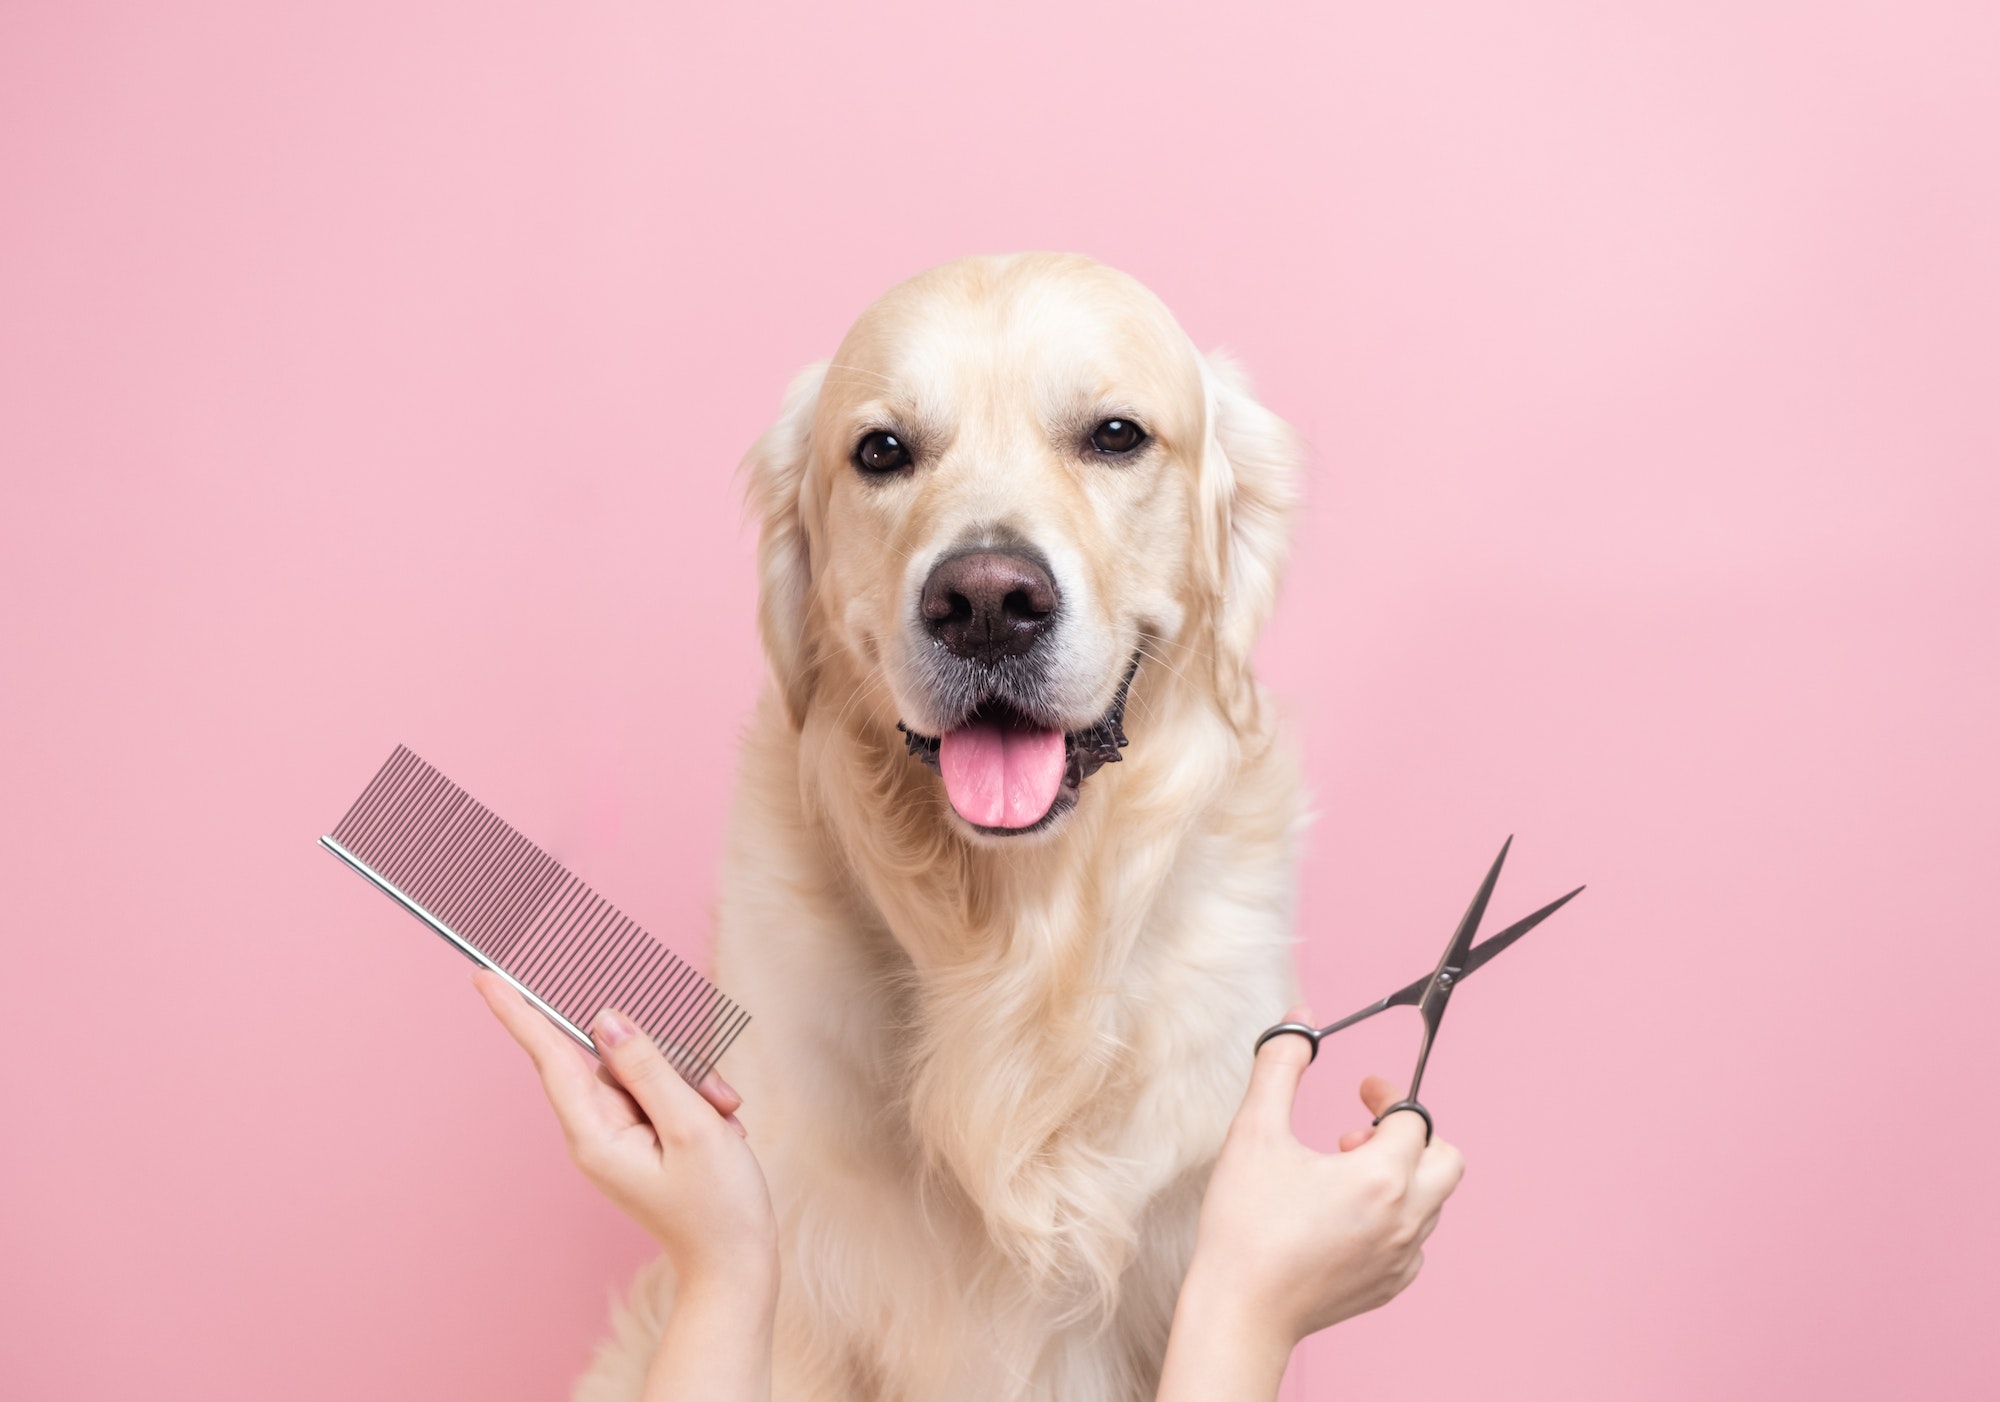 A professional is grooming a dog's coat against a monochrome background.